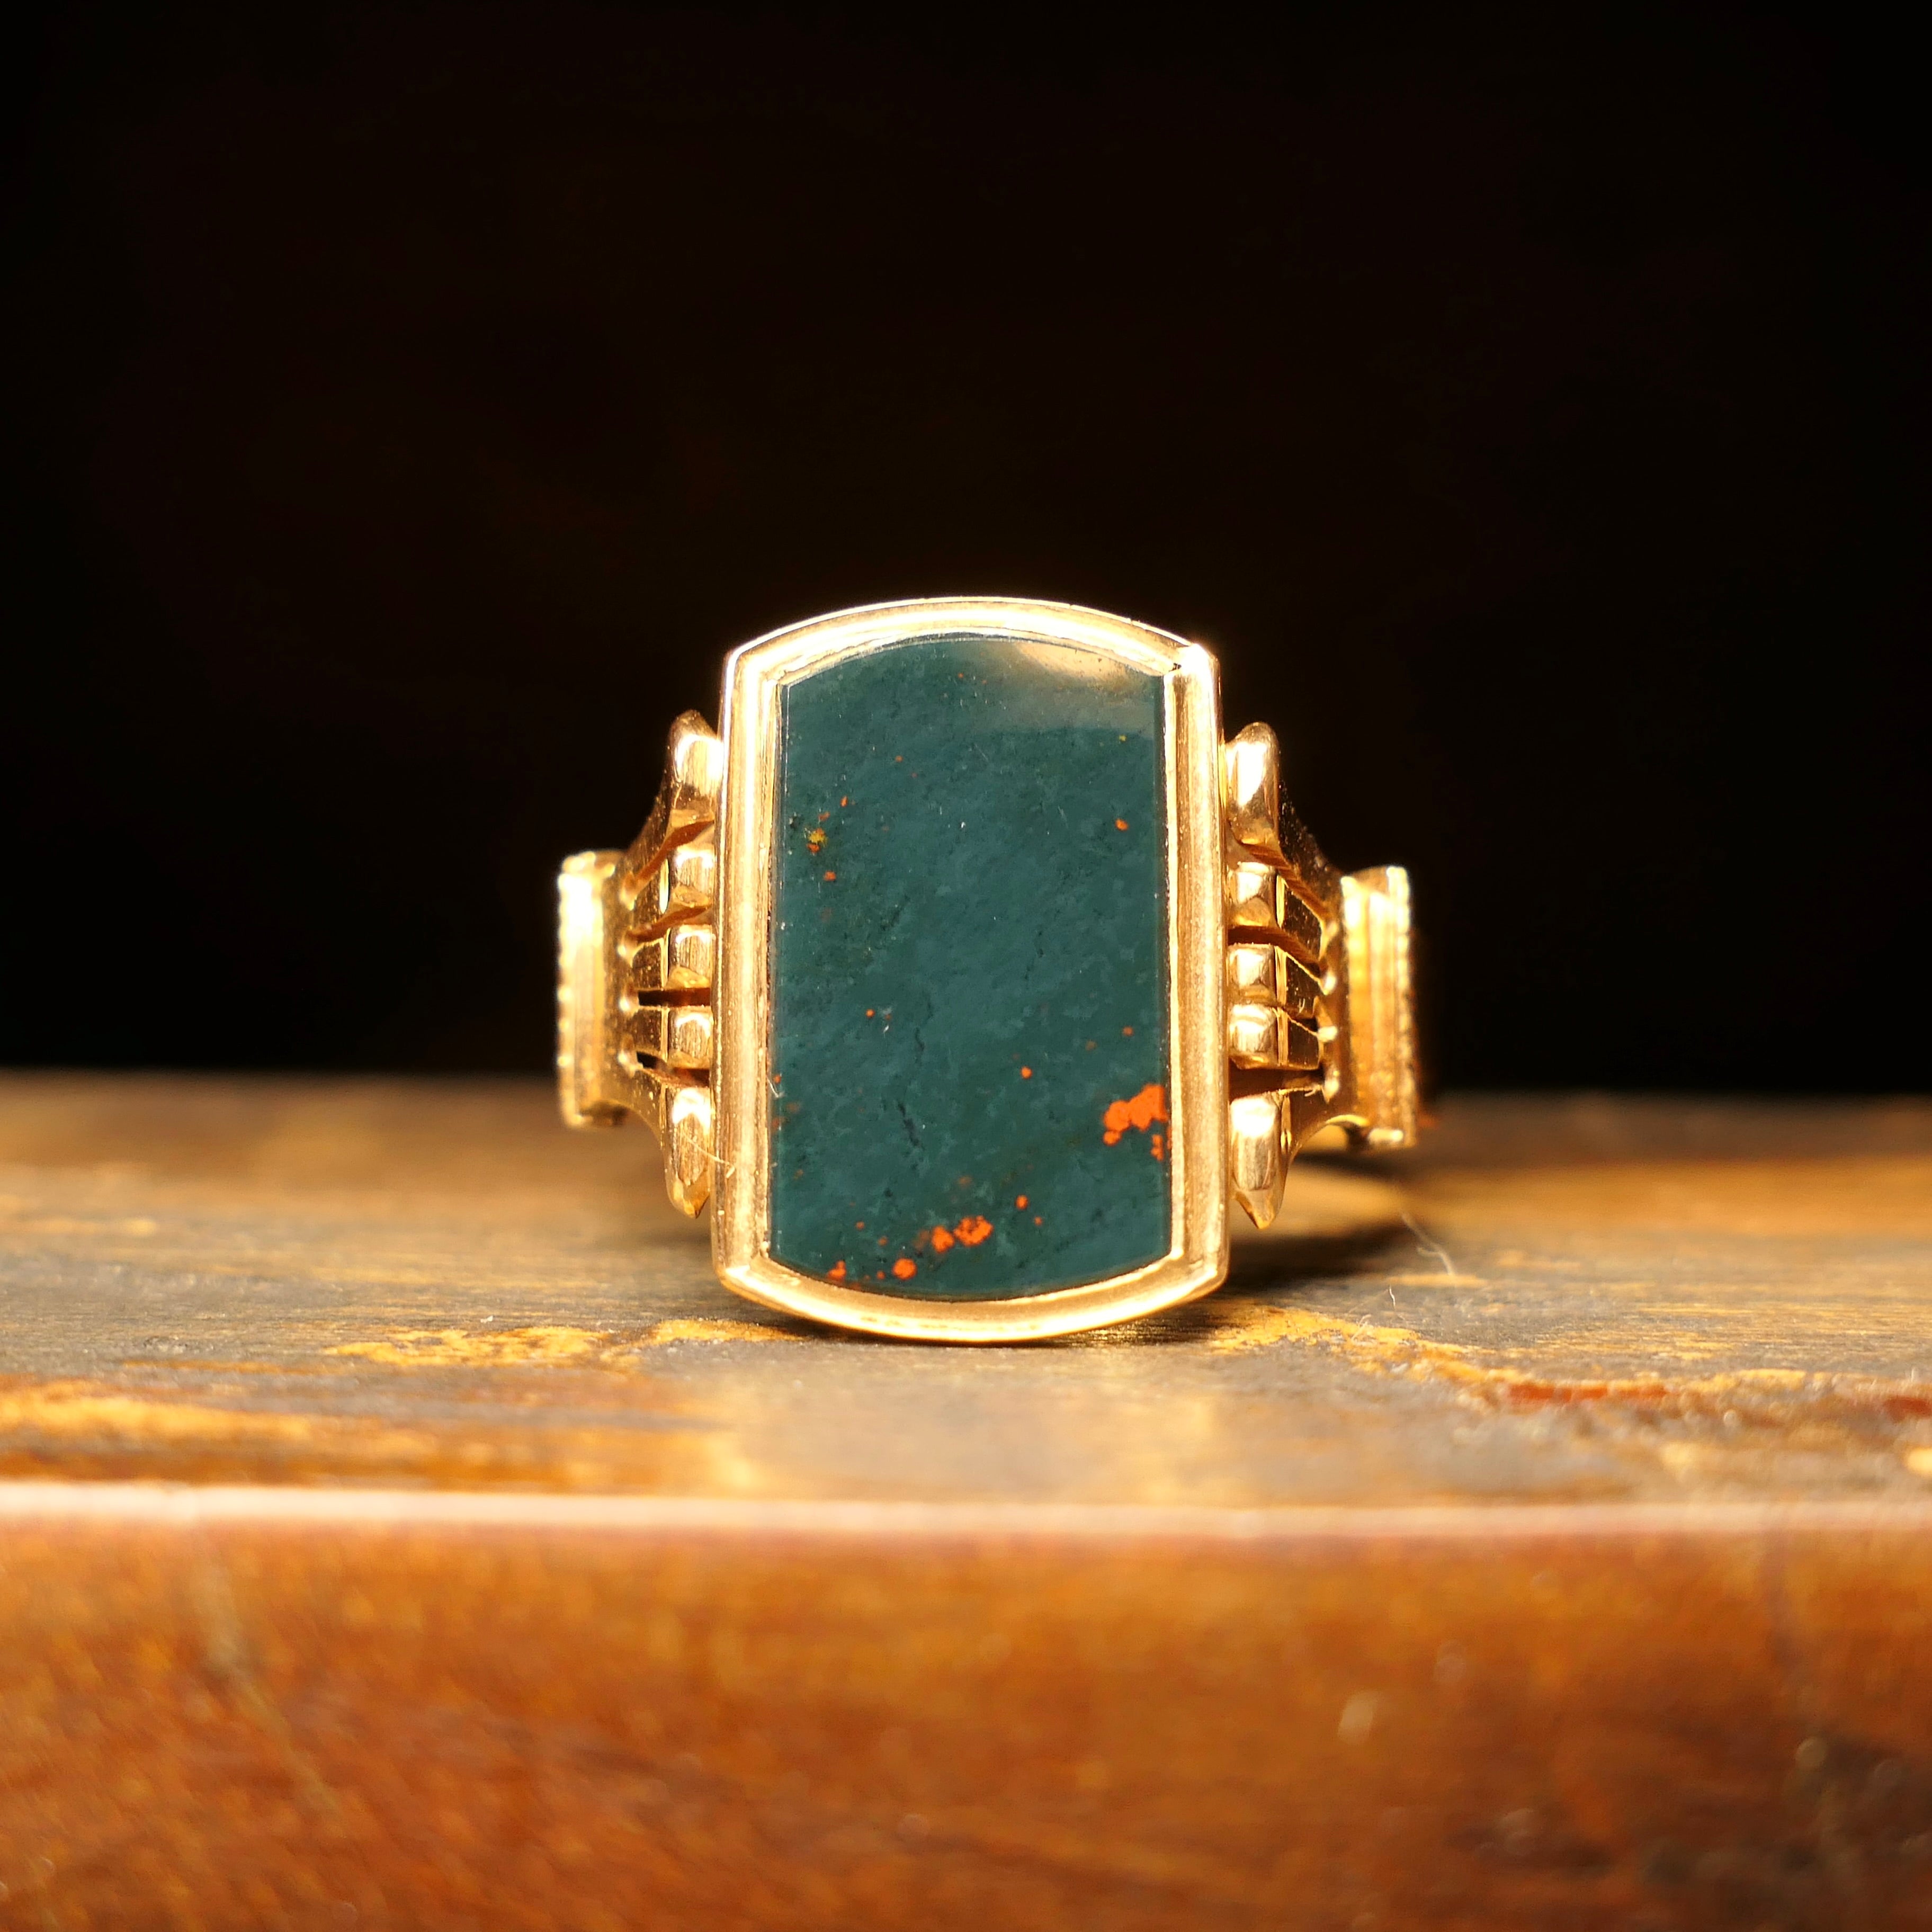 Antique, Gents, 18ct Gold, Bloodstone Signet Ring